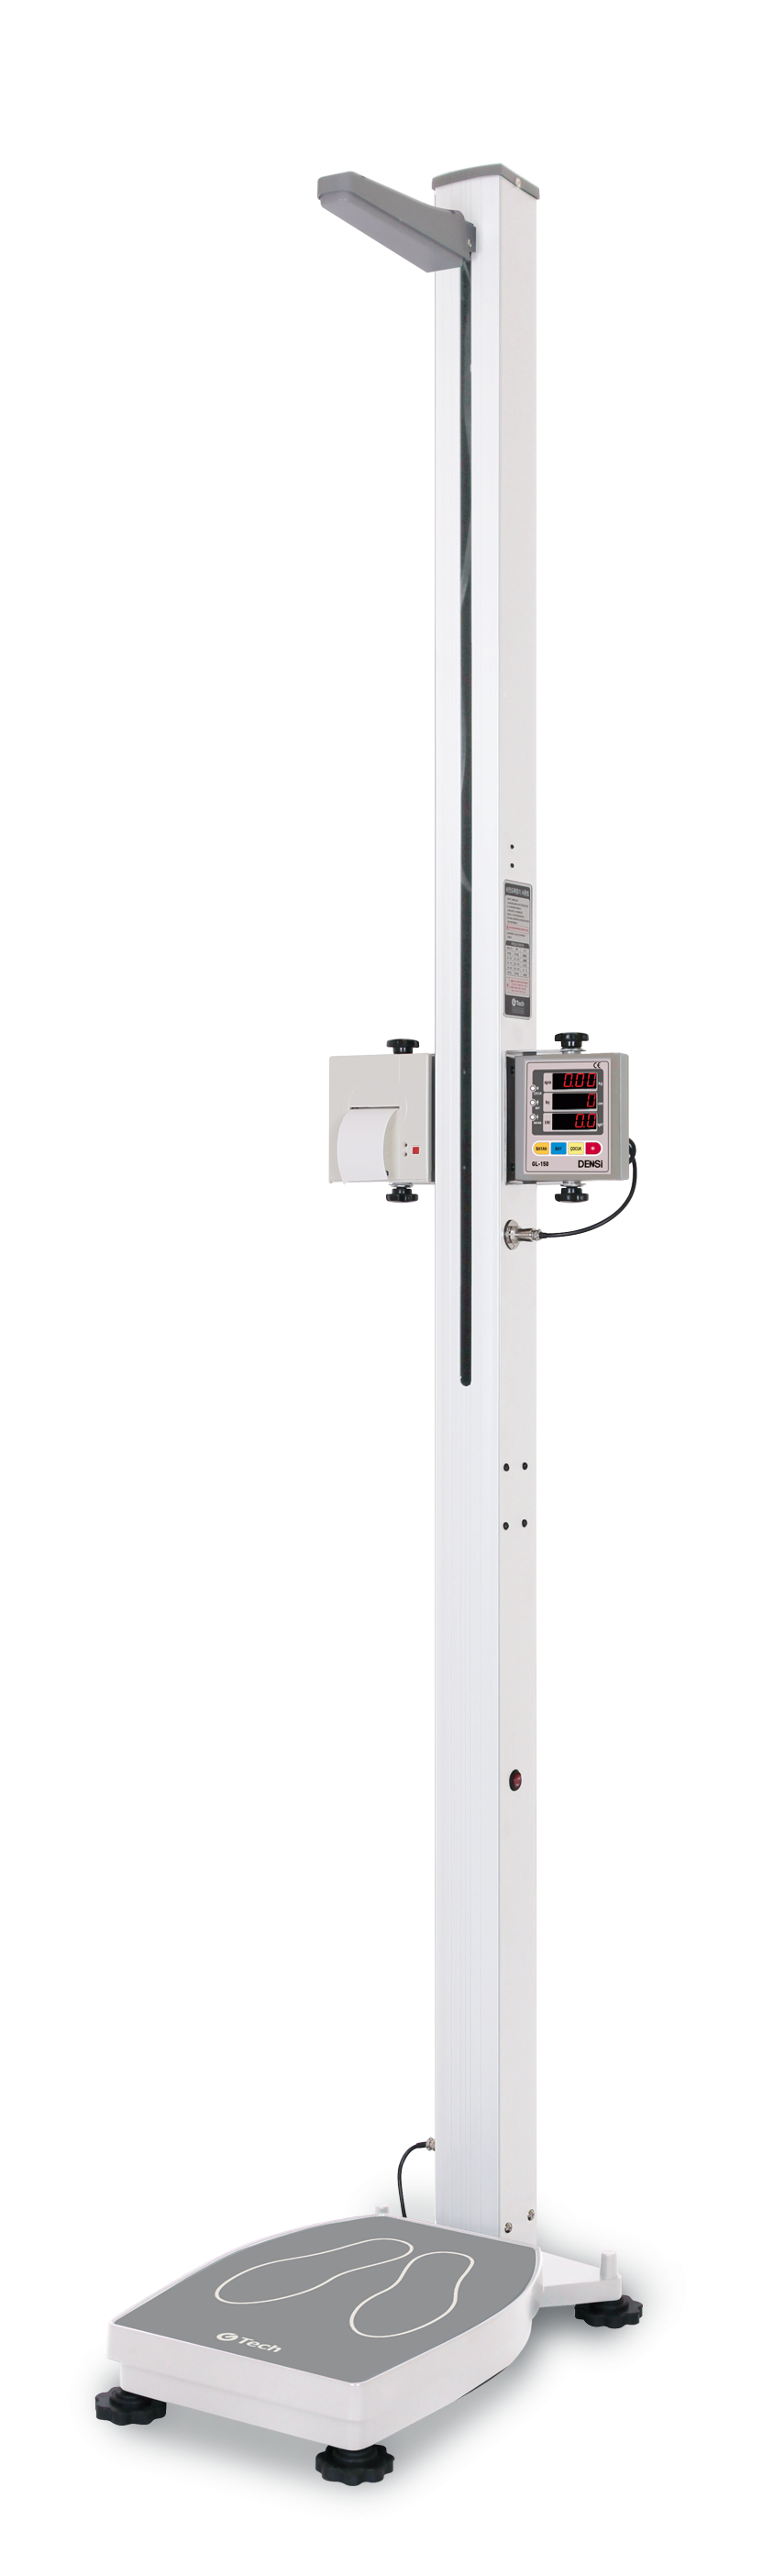 WEIGHT AND HEIGHT MEASURING SYSTEM